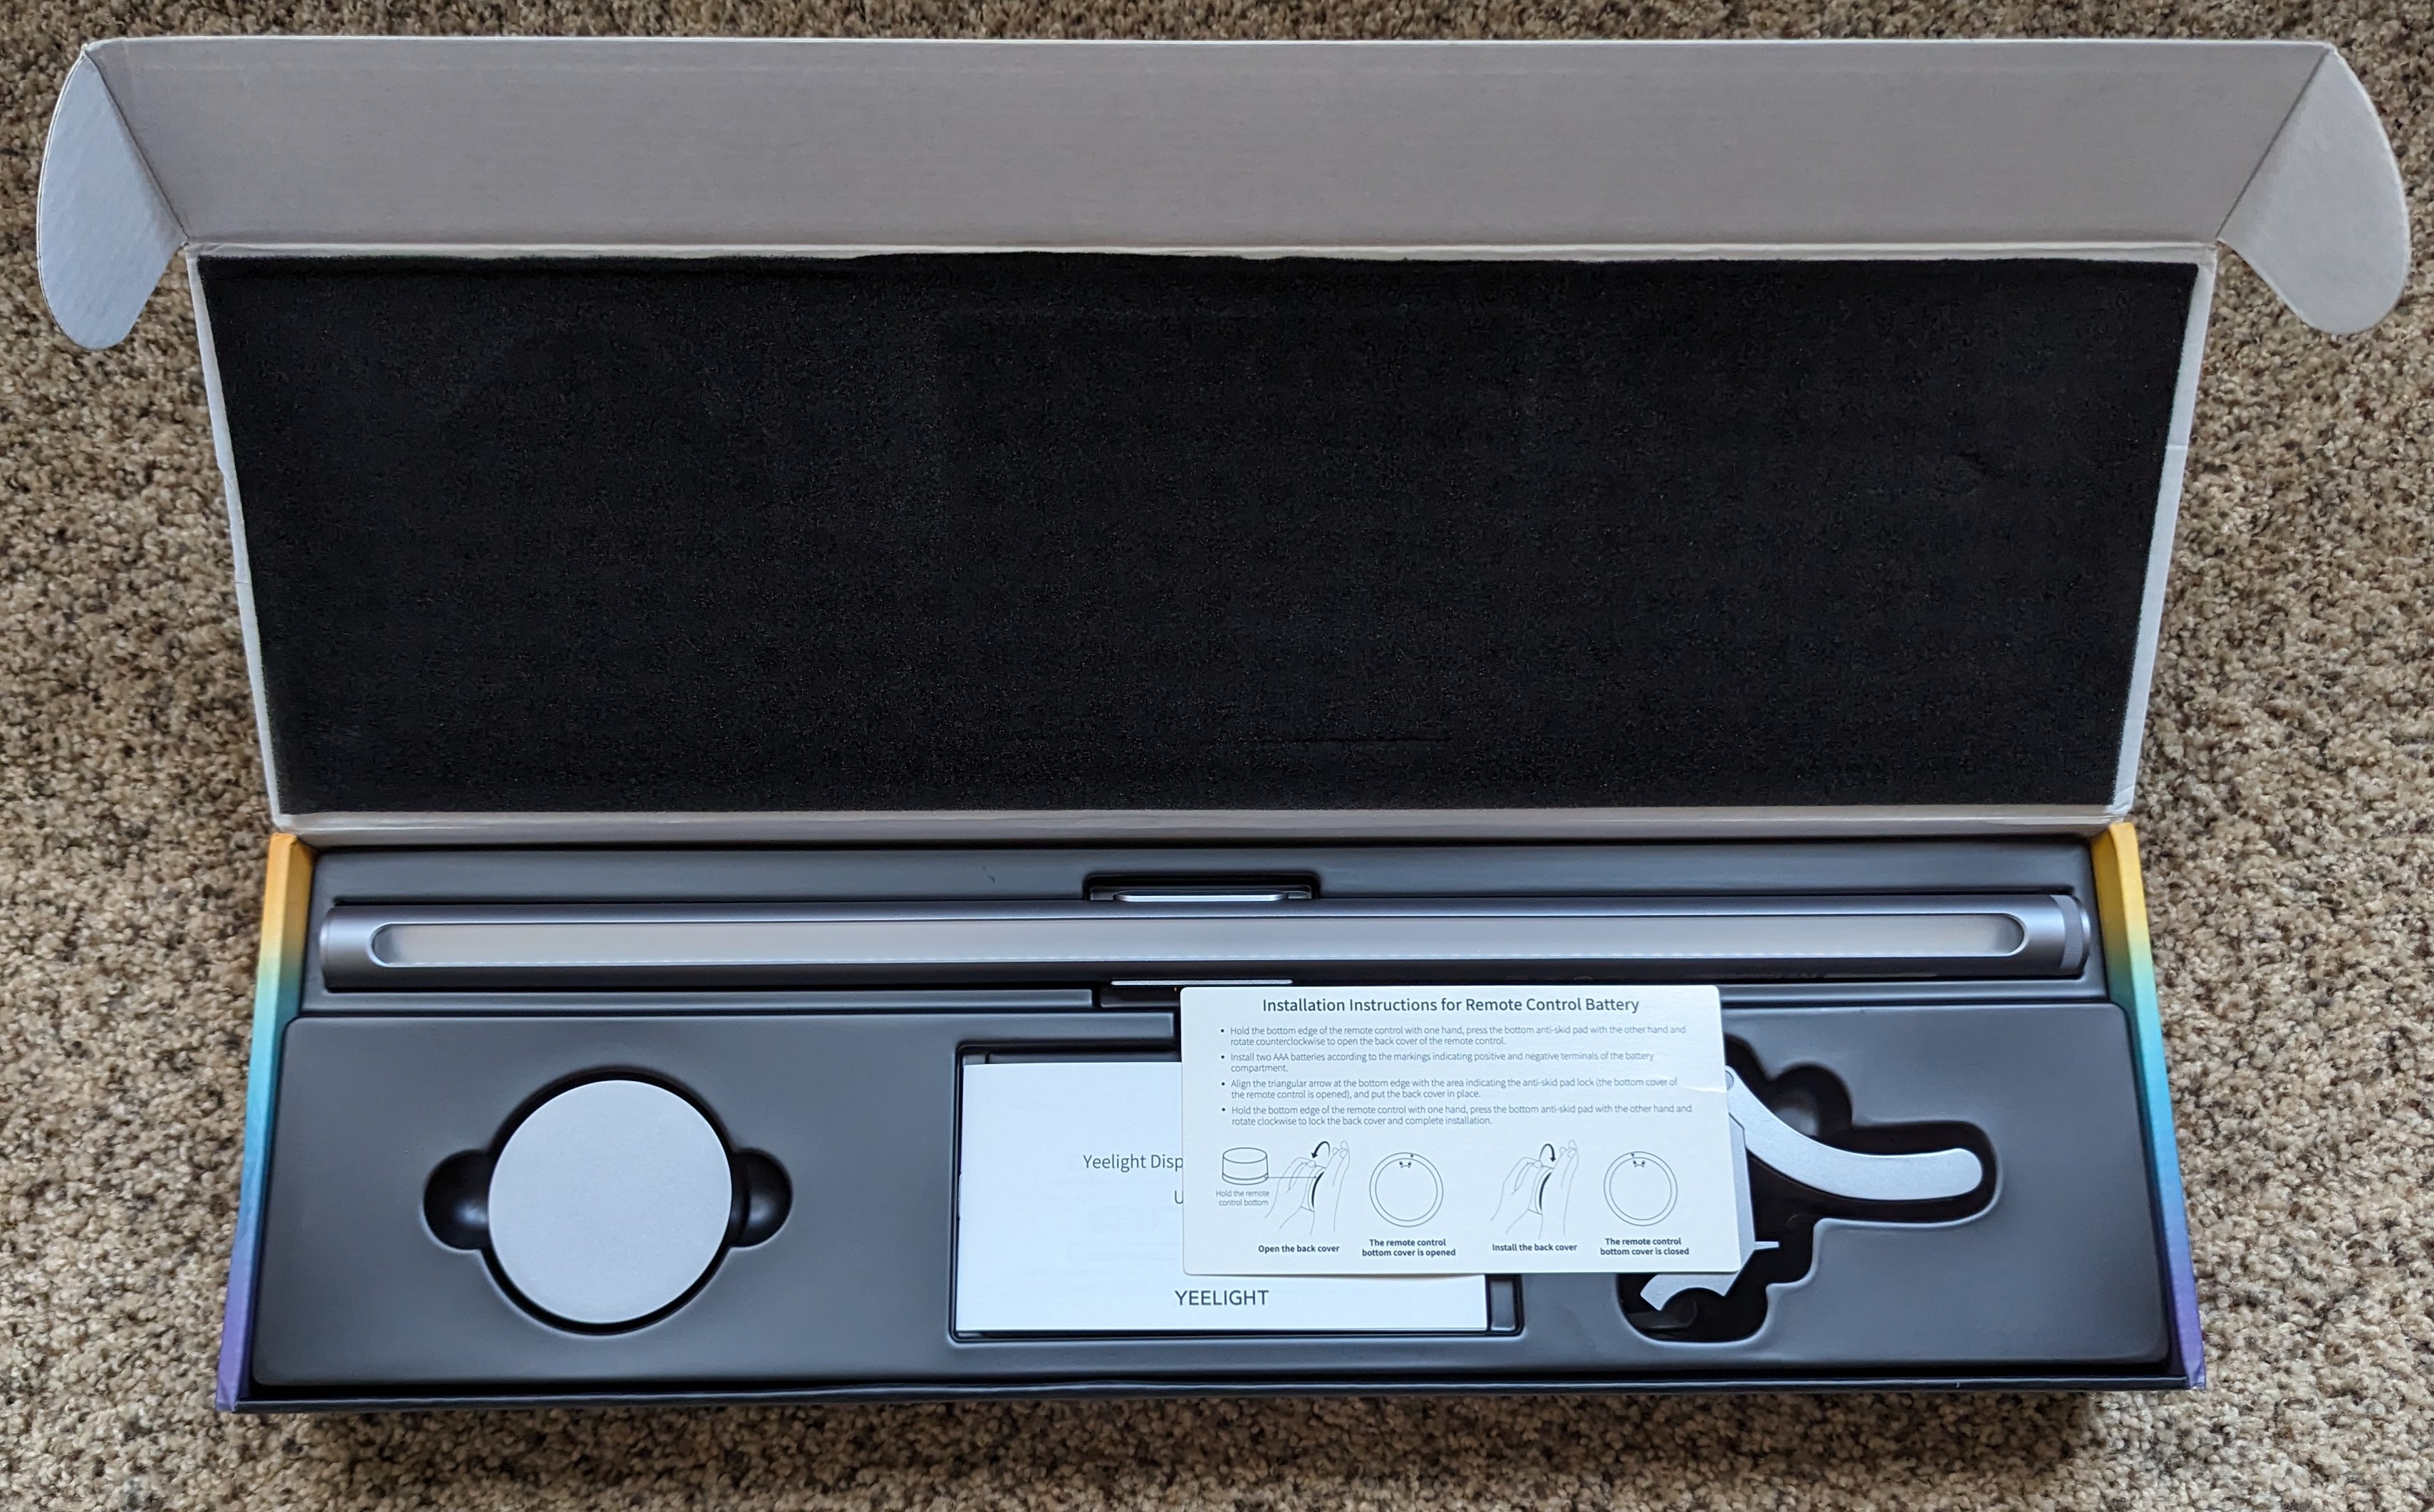 Picture showing internals of the opened box.